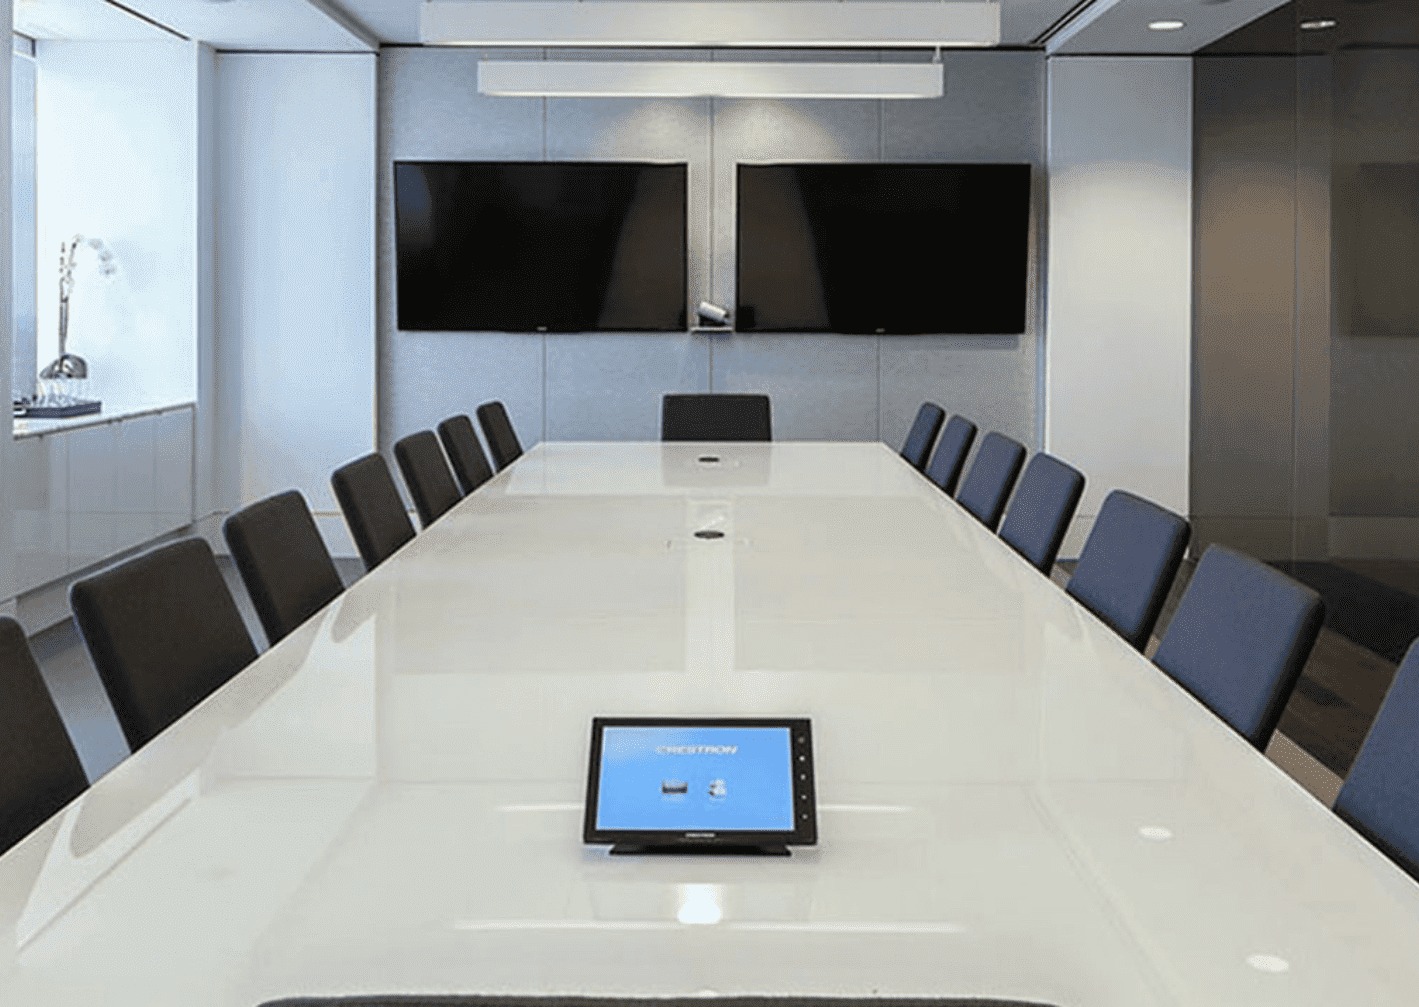 Conference rooms with Wi-Fi